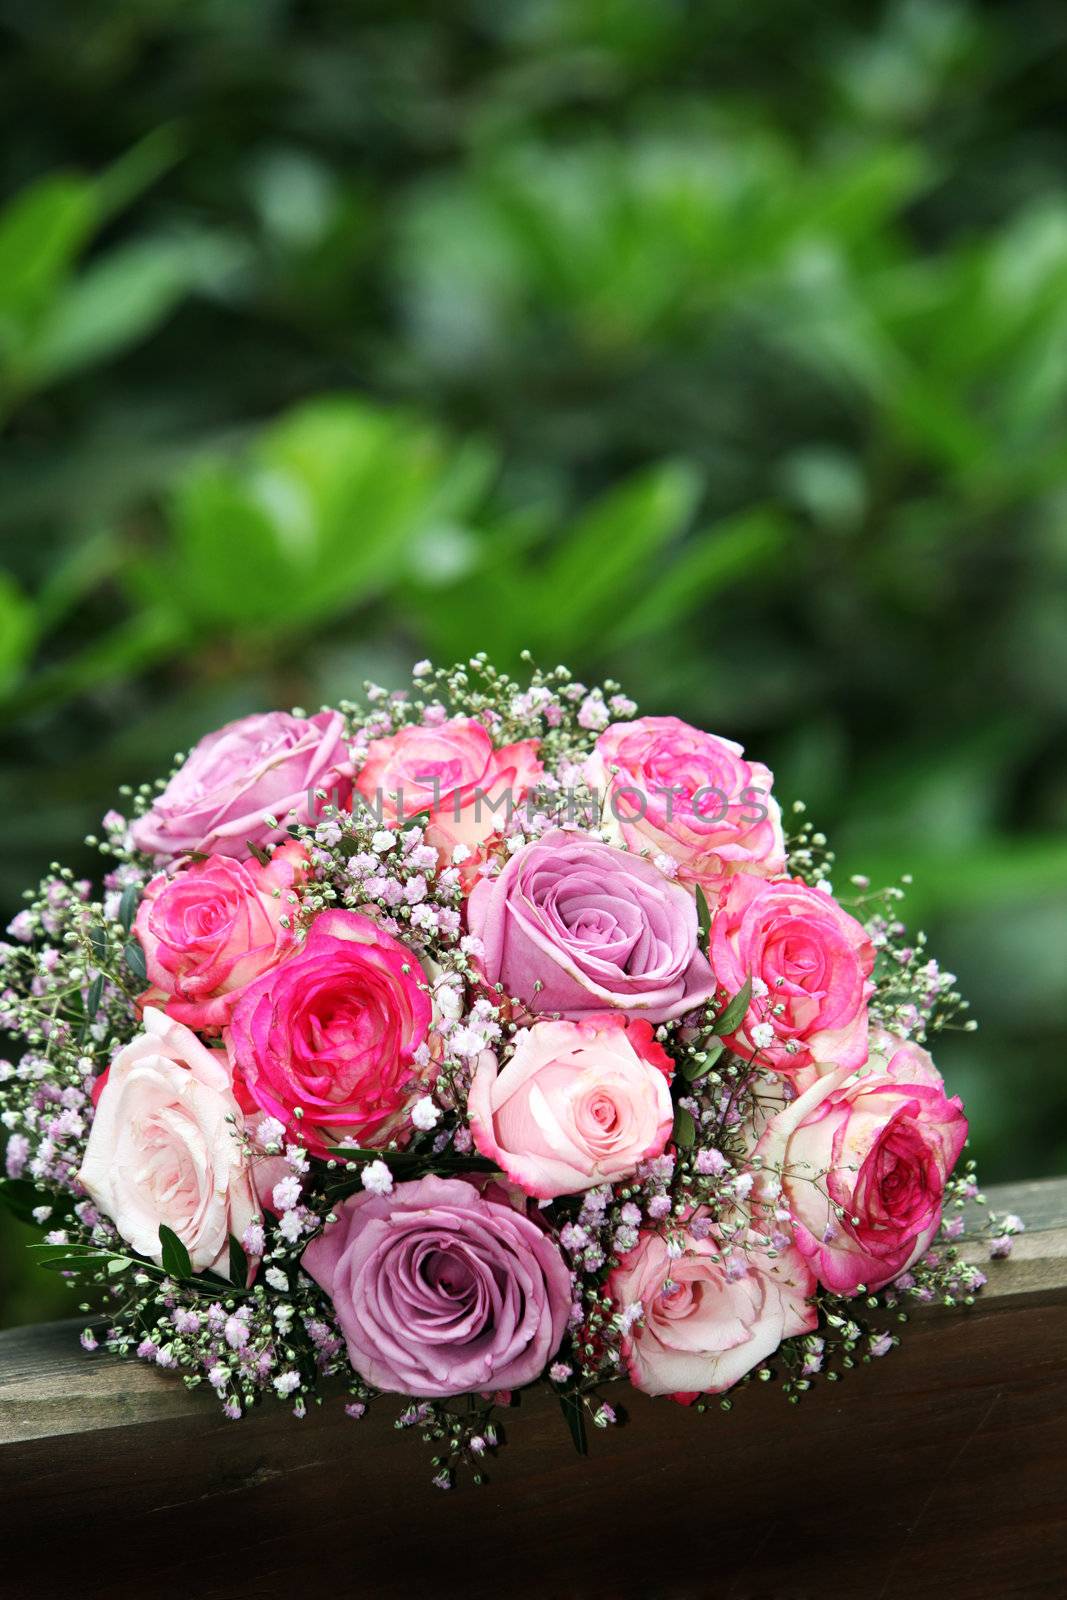 Bride - bouquet of roses in pink and lilac by Farina6000